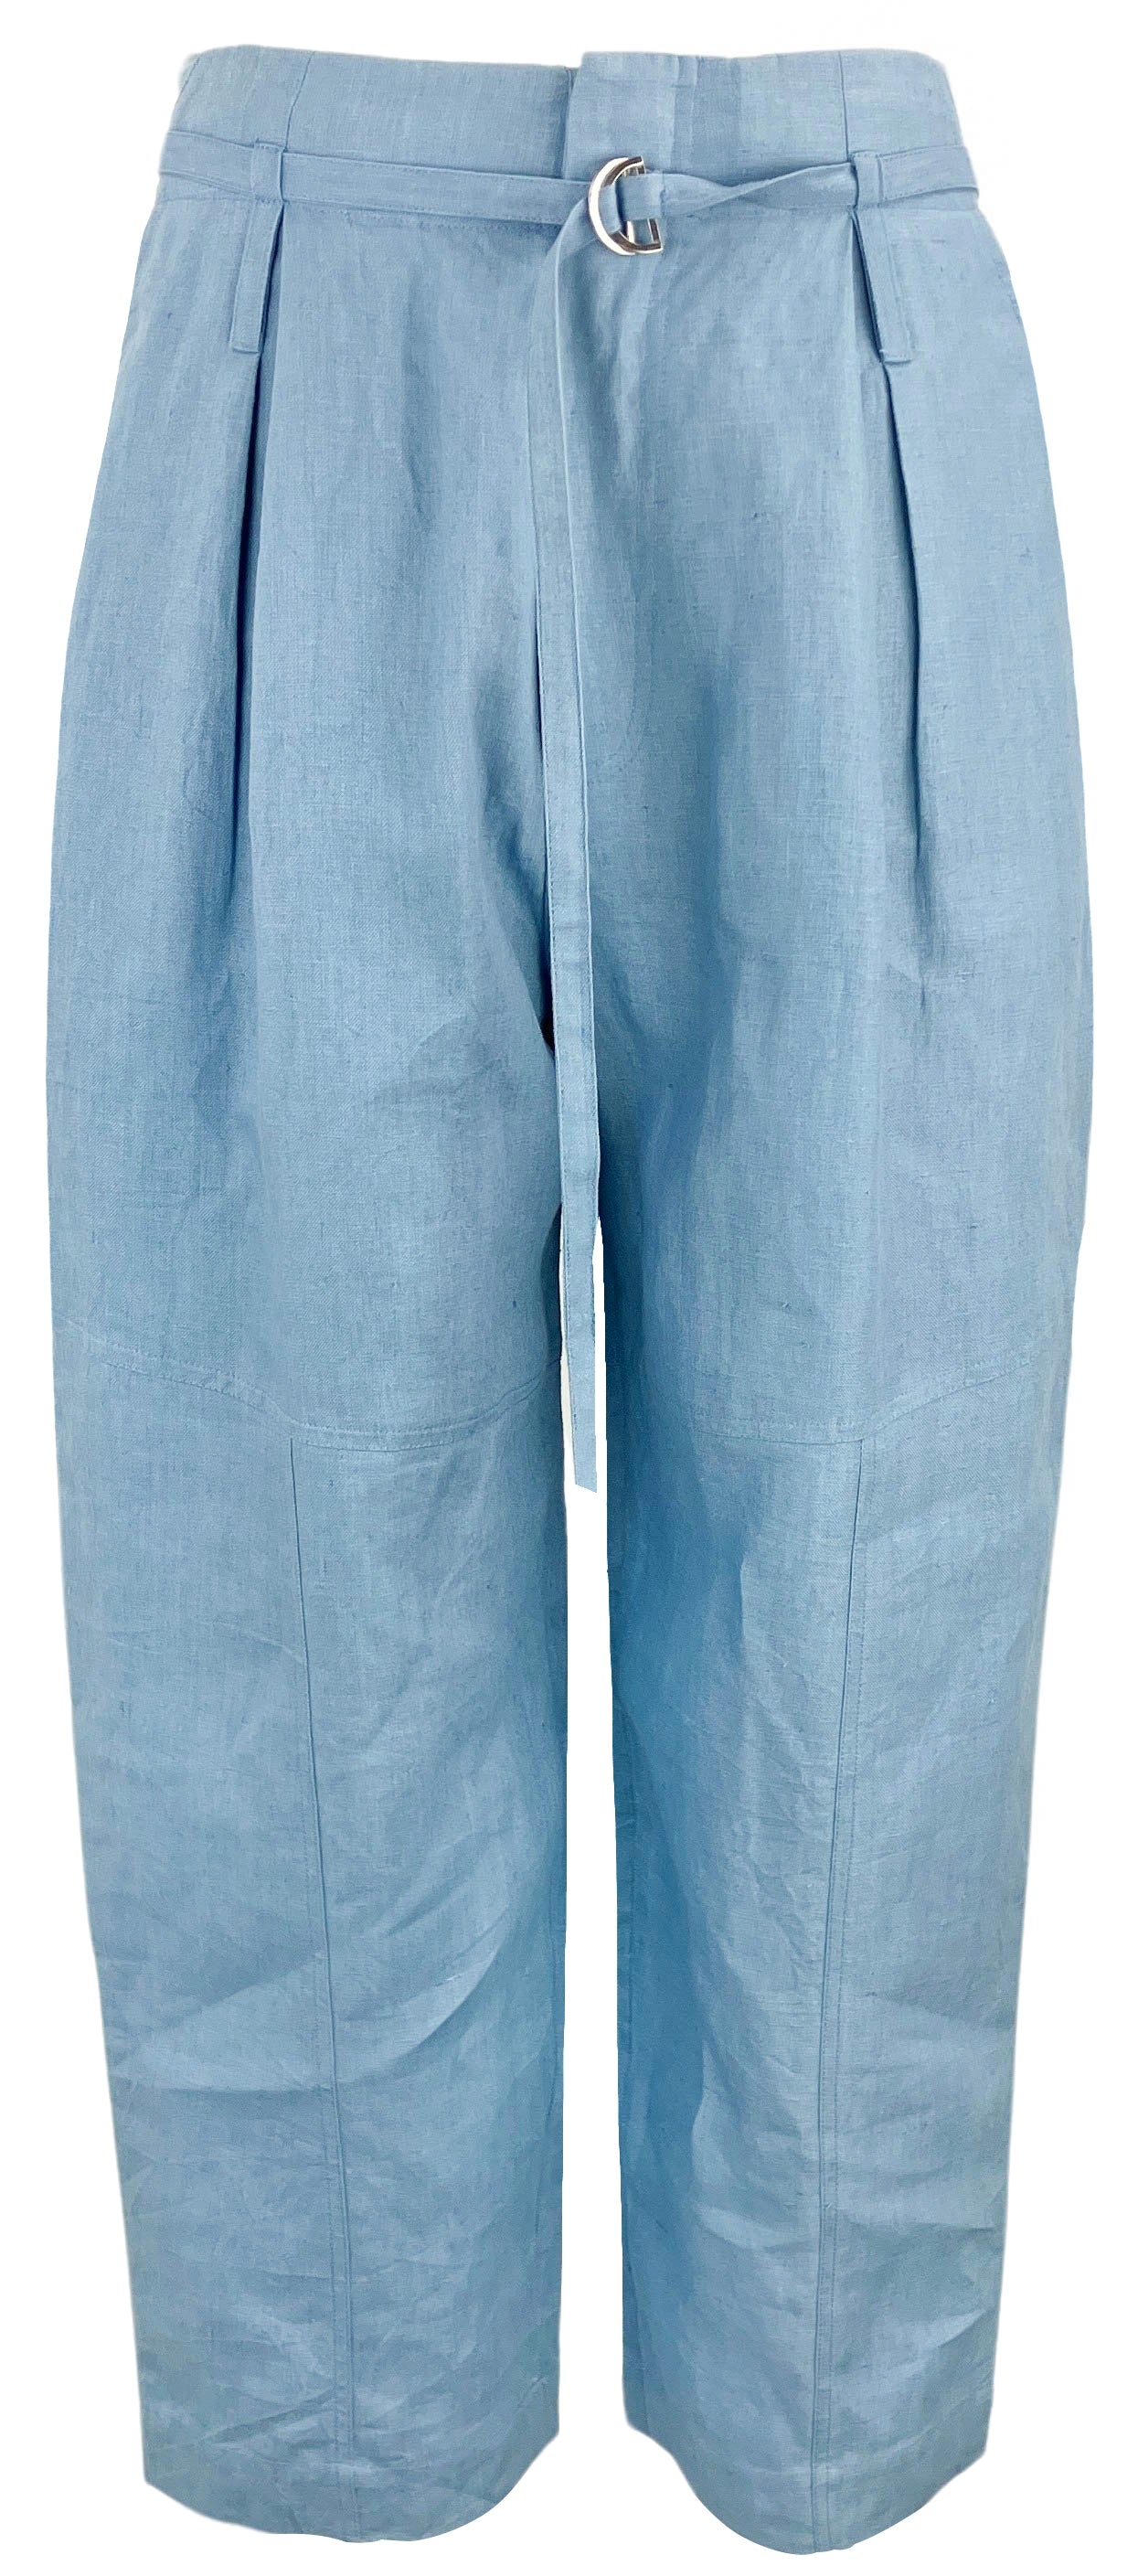 Mariacher. Molinos Cesira Pant in Light Blue - Discounts on Mariacher. at UAL